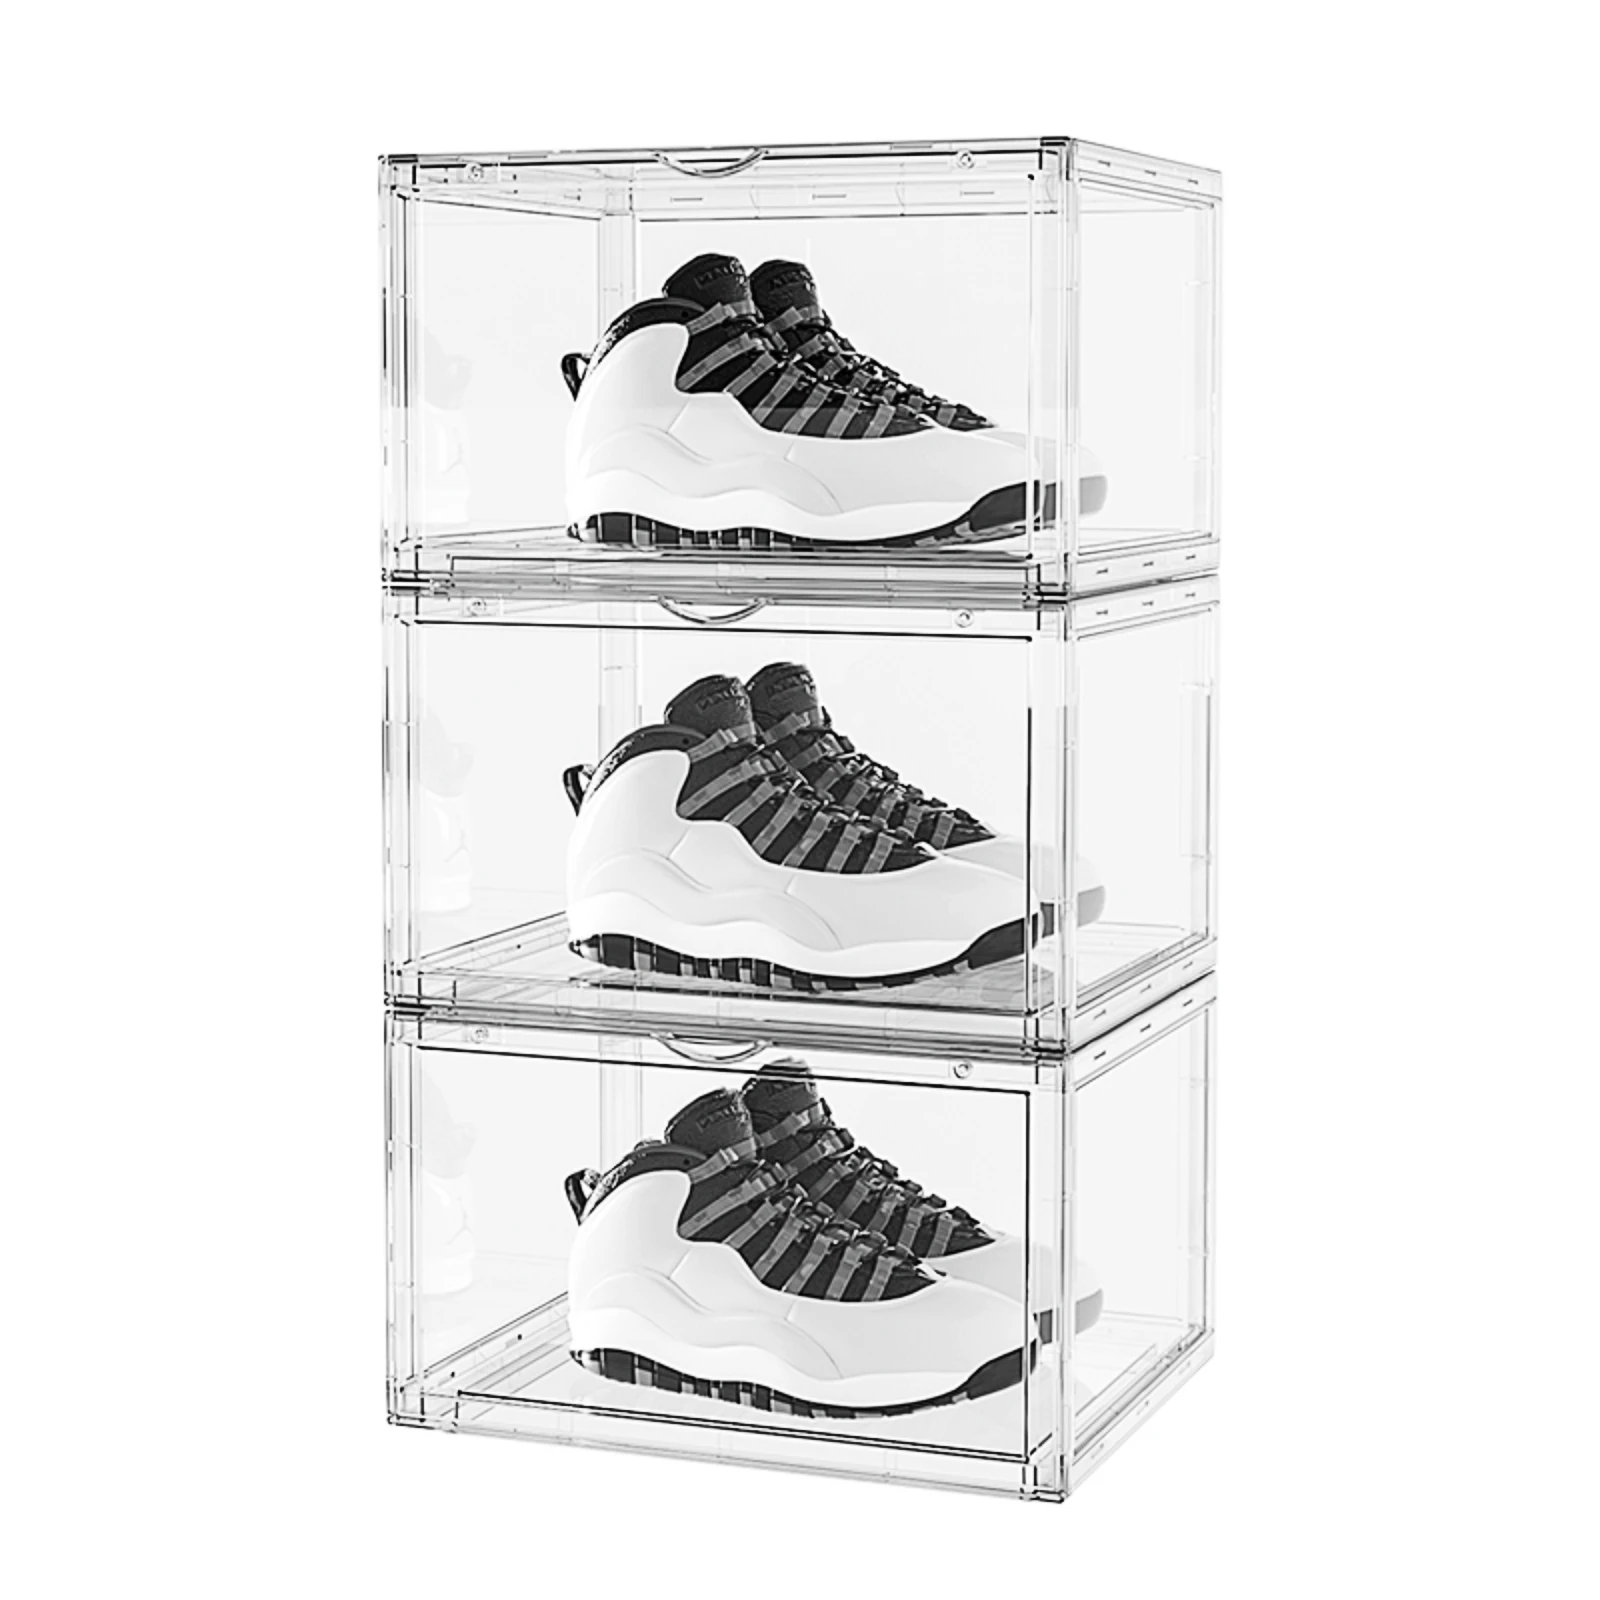 Stackable sneaker display case with a drop-side magnetic door, featuring a versatile and convenient interlocking design. The sleek display case is constructed with durable materials, allowing for easy stacking and creating a customizable showcase for your sneaker collection.